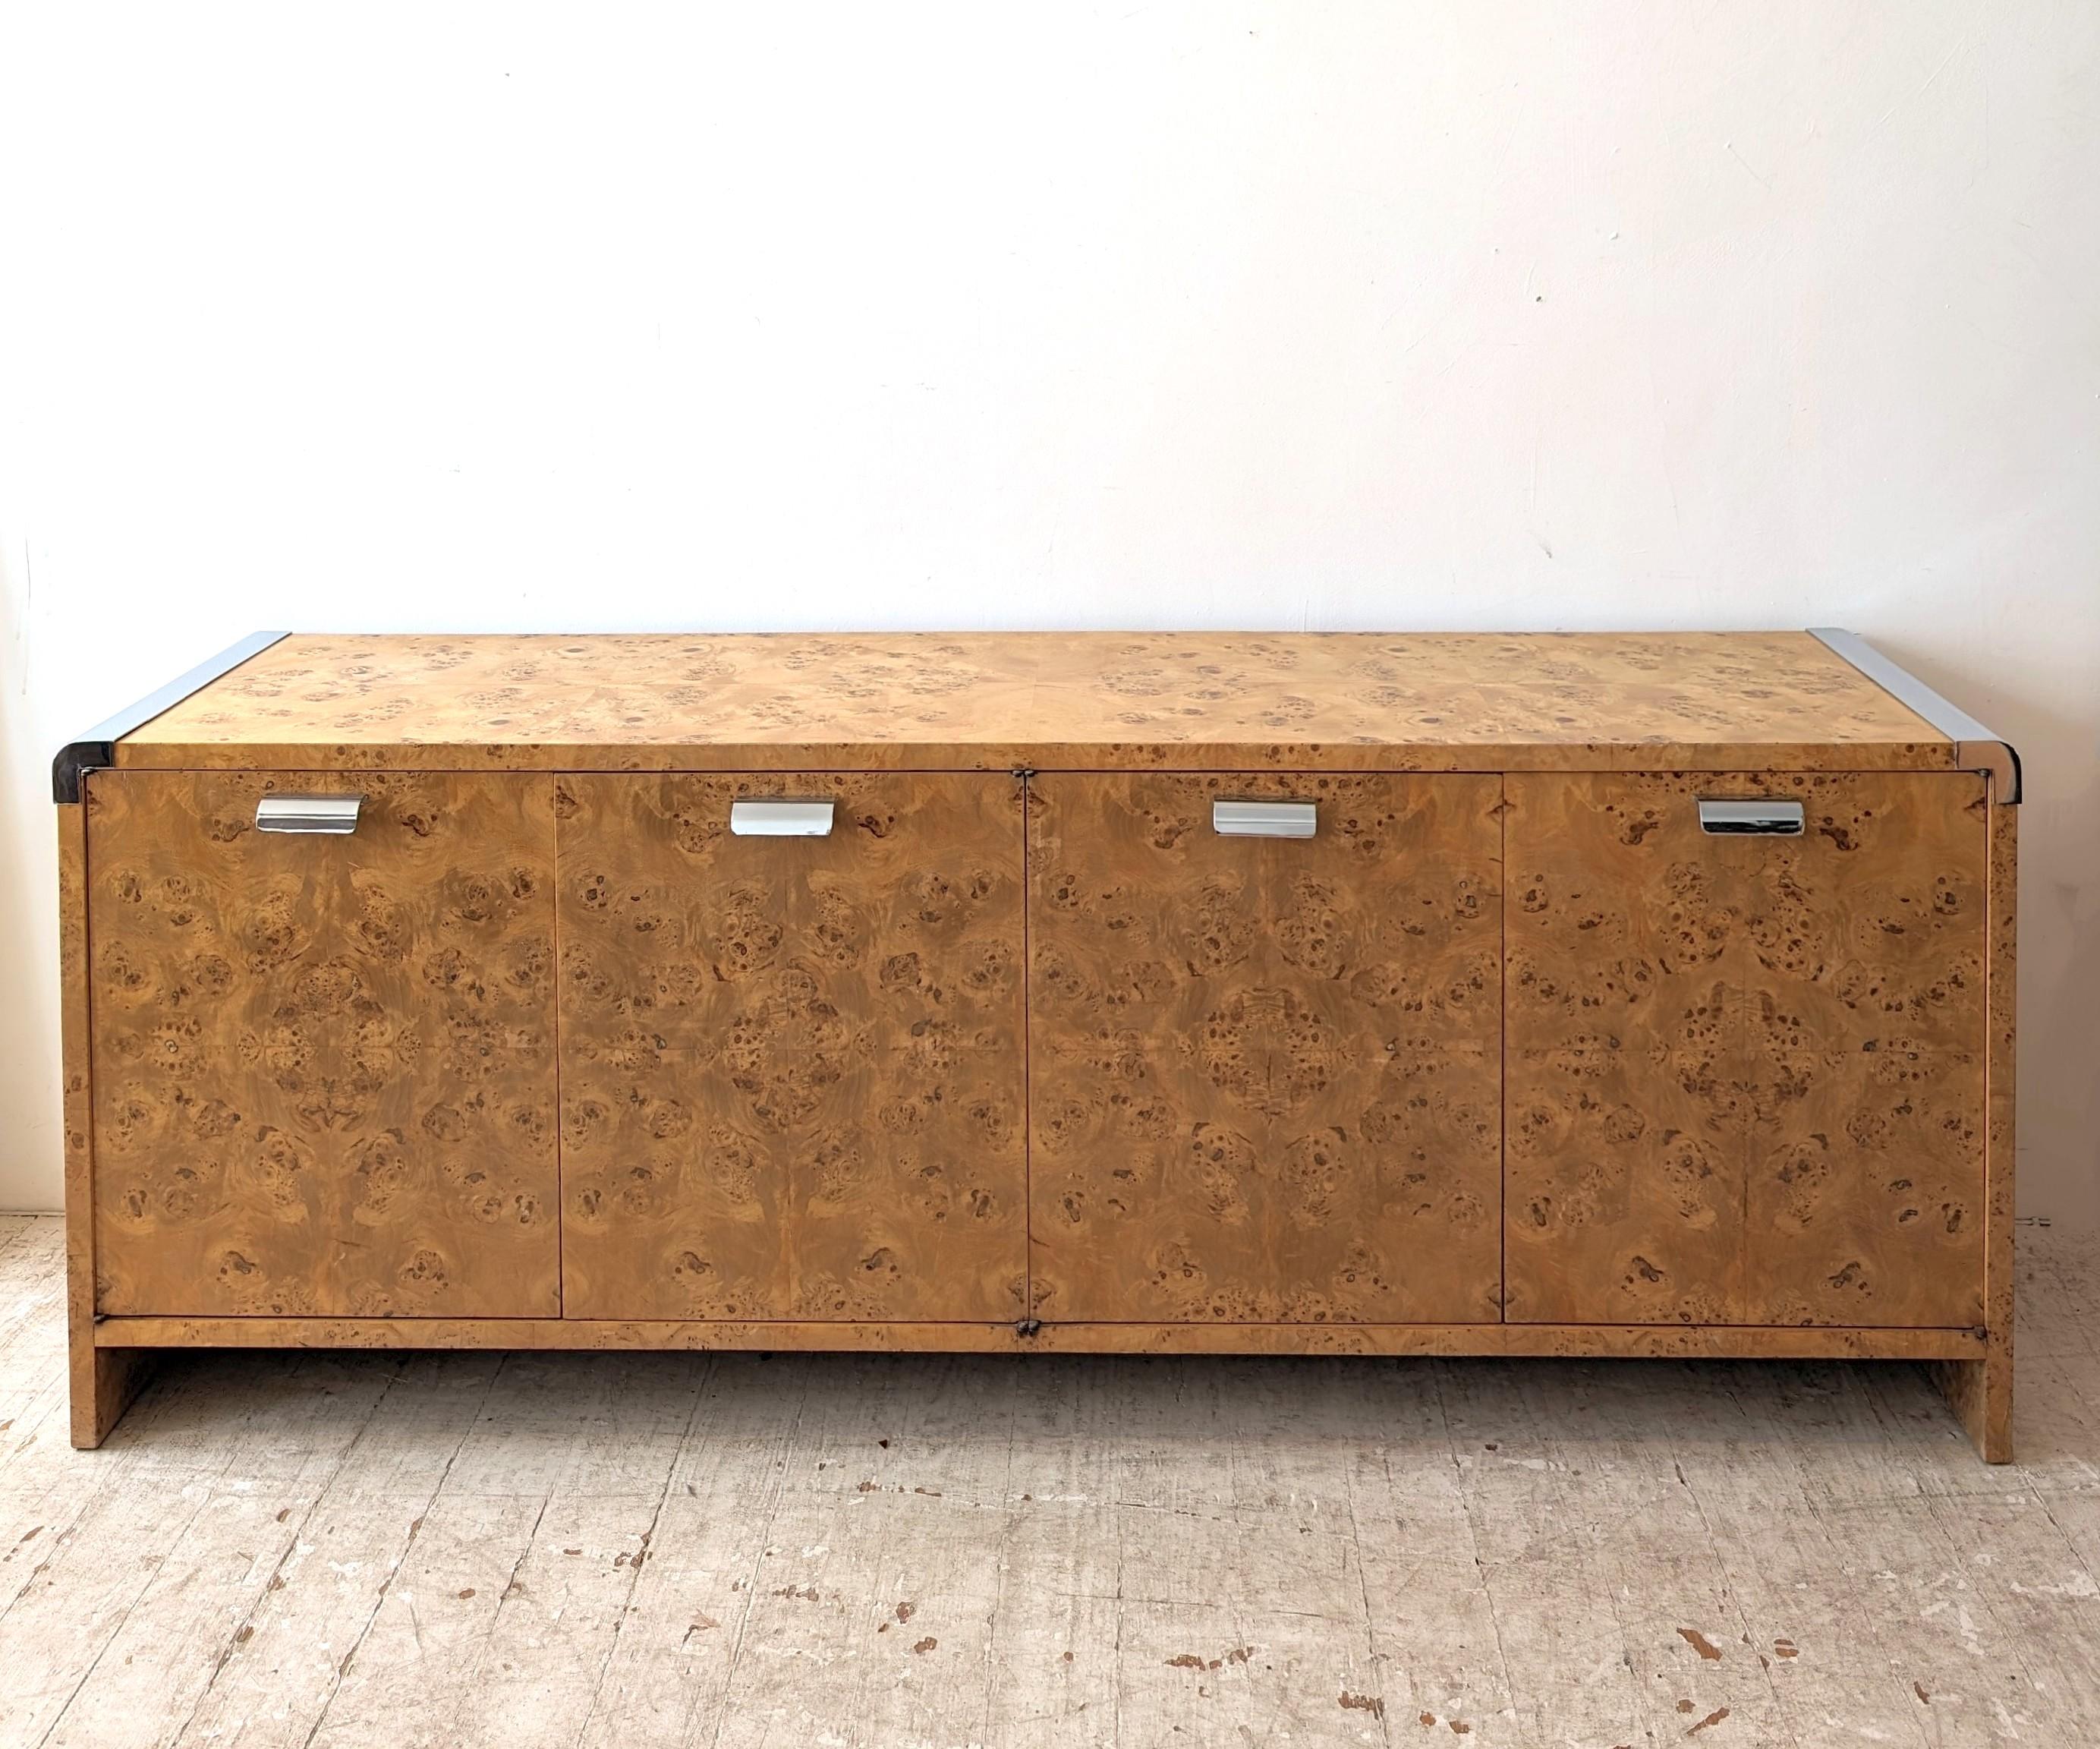 Rare burr olivewood and steel sideboard by Leon Rosen for Pace Collection, USA 1980s.
Curved chromed steel ends and handles. Beautifully figured bookmatched veneer top, front and ends. Cabinet doors open onto six large drawers.
No makers'